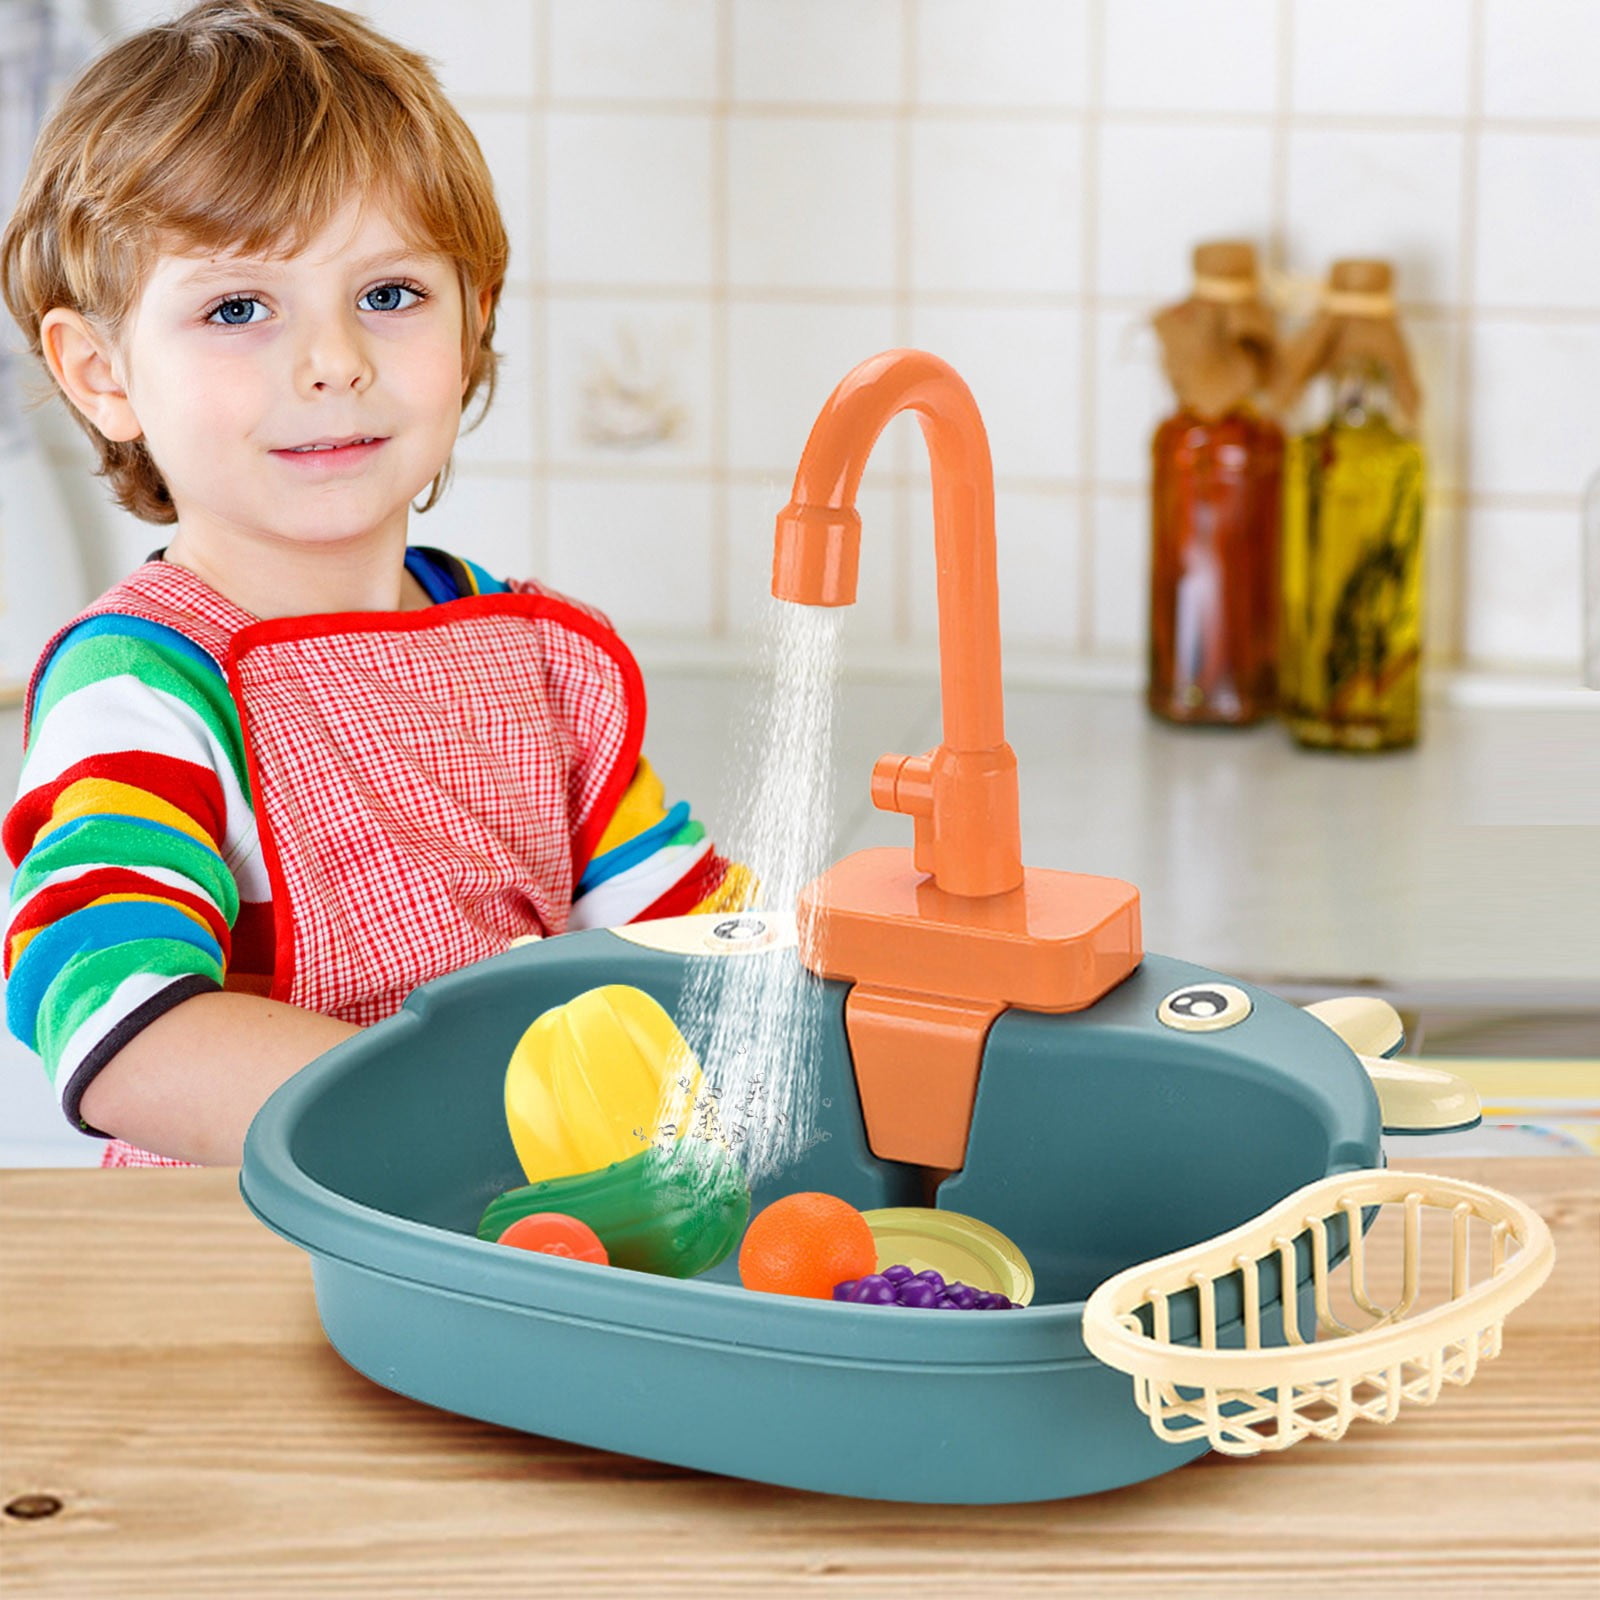 Details about   Kitchen Play Set Pretend Playset Toy Cooking Sink For Kids Gift Toddler Girl Boy 